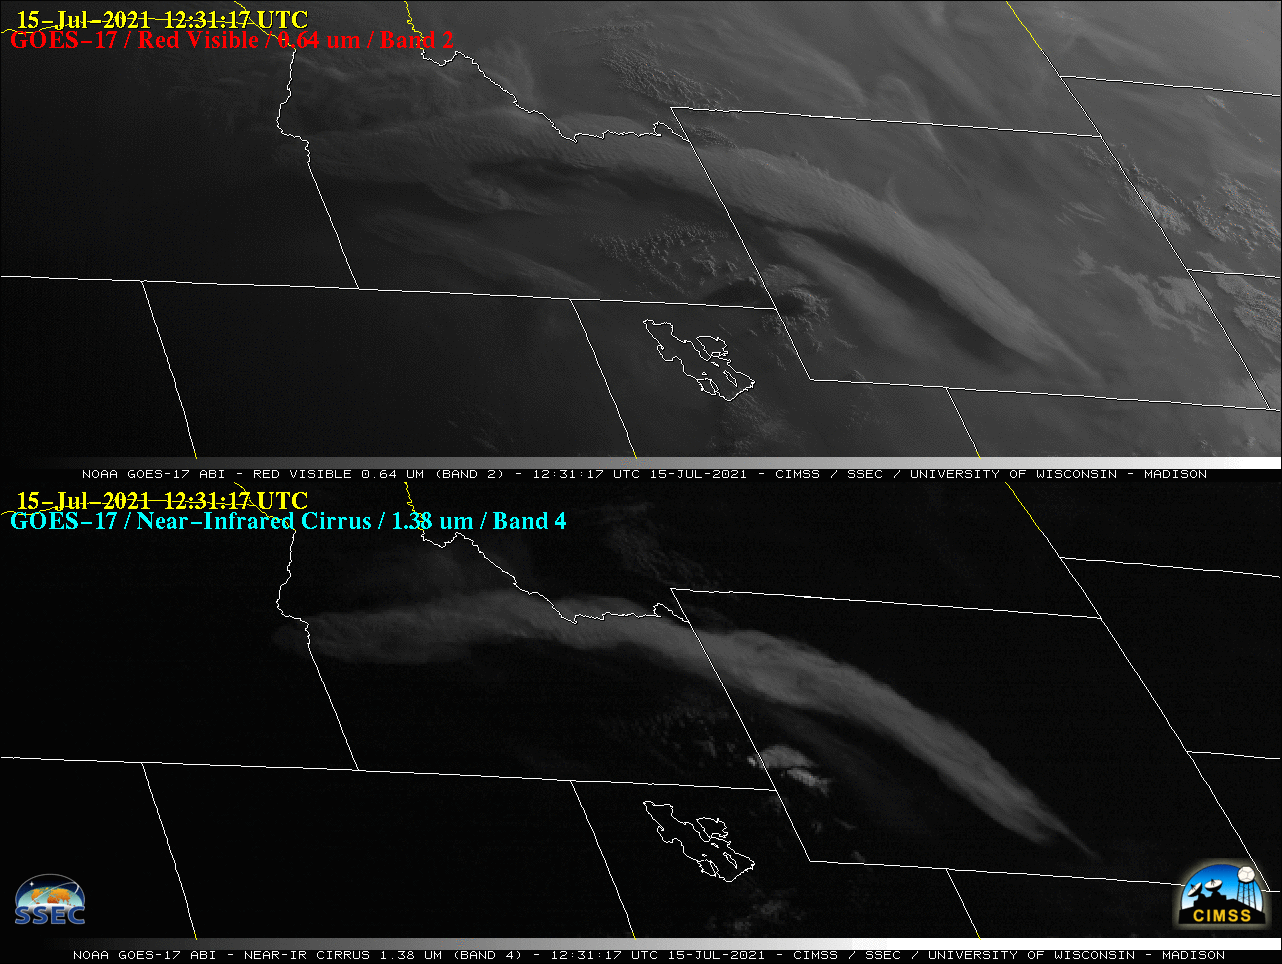 GOES-17 "Red" Visible (0.64 µm, top) and Near-Infrared "Cirrus" (1.37 µm, bottom) images [click to play animation | MP4]